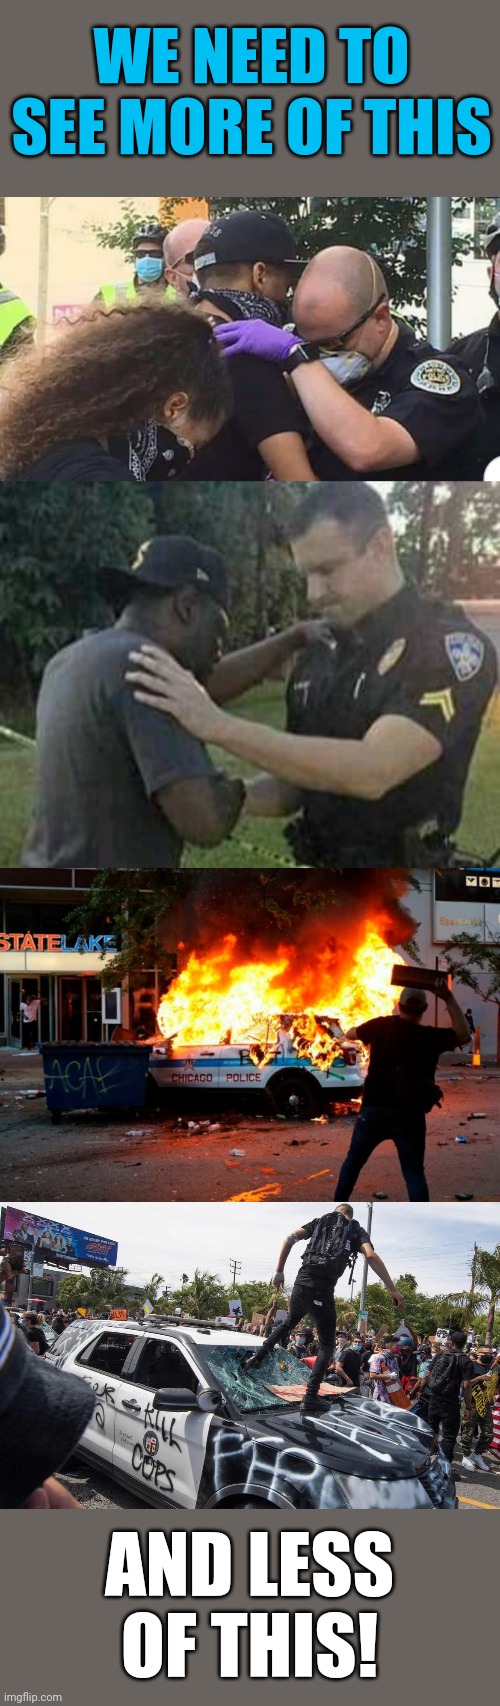 C'mon, America!  We're better than this! | WE NEED TO SEE MORE OF THIS; AND LESS OF THIS! | image tagged in cops,protesters,praying,together,make america great again | made w/ Imgflip meme maker